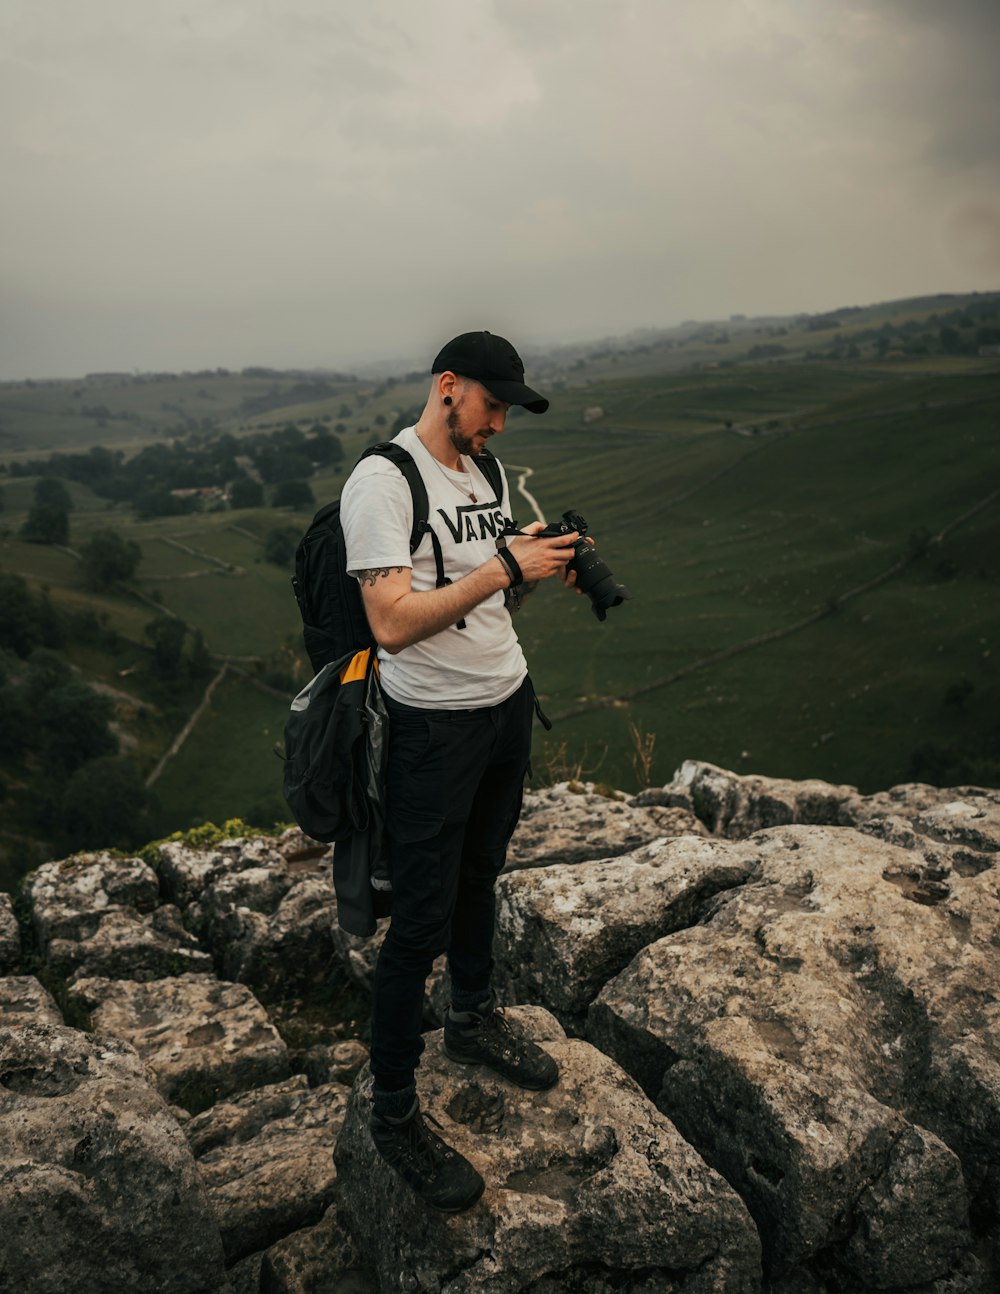 man in white t-shirt and black pants holding black dslr camera standing on rocky mountain